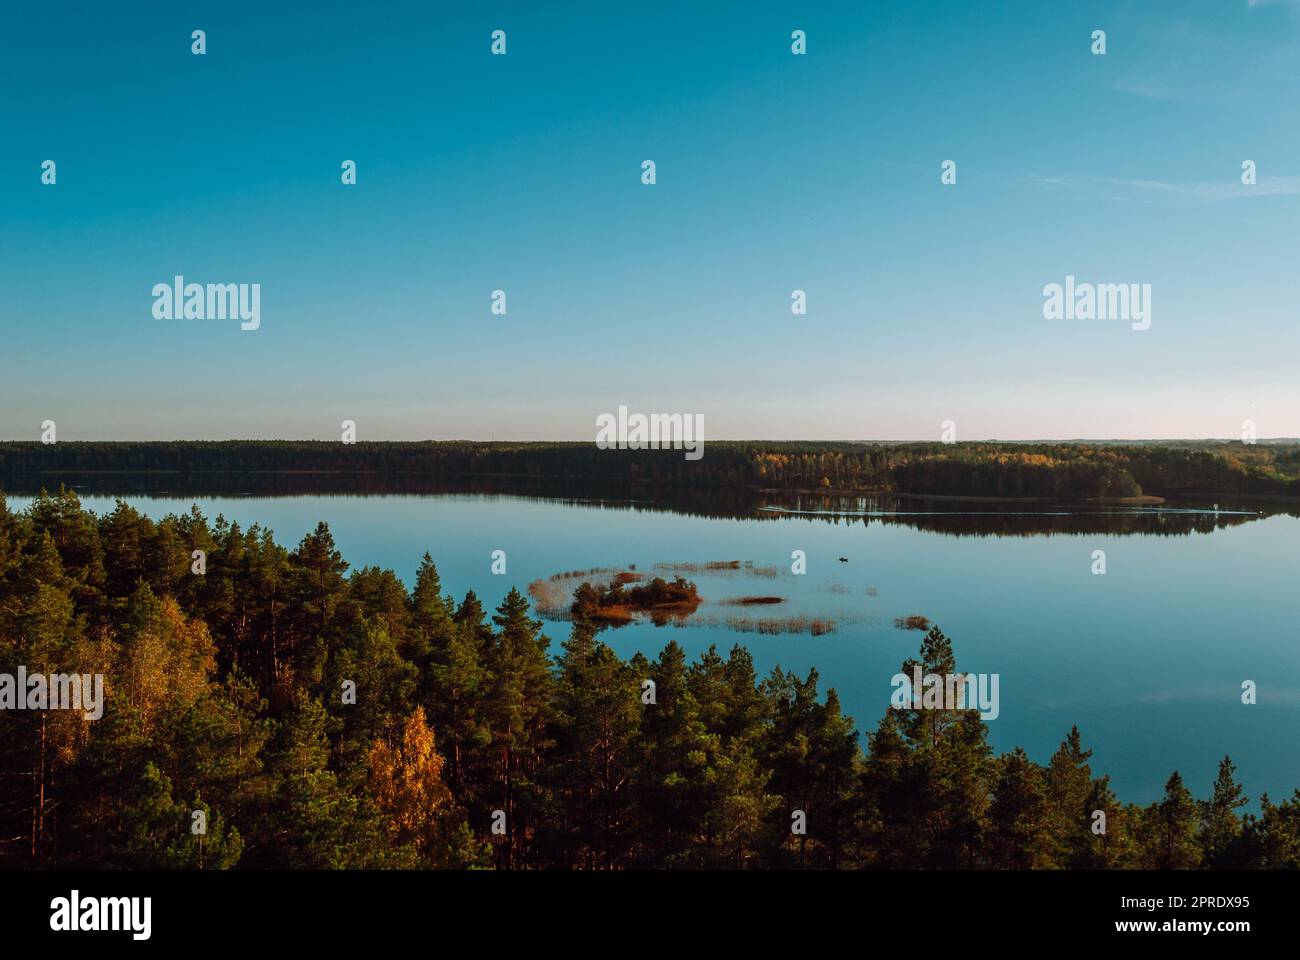 Top view of the island on Lake Baltieji Lakajai in Labanoras Regional Park, Lithuania against a blue sky. Stock Photo